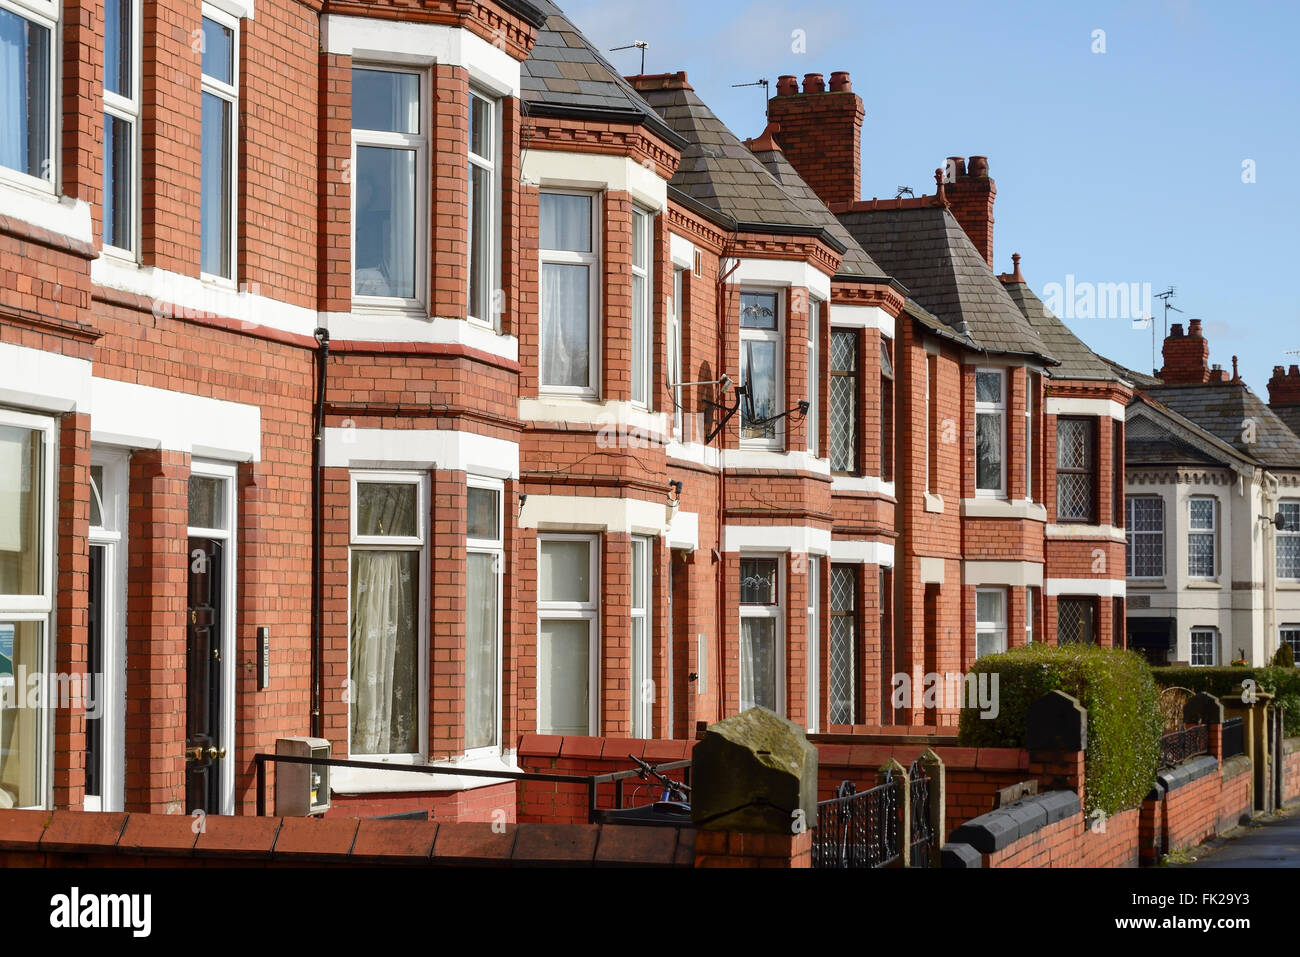 Row of bay fronted Victorian terraced houses Stock Photo